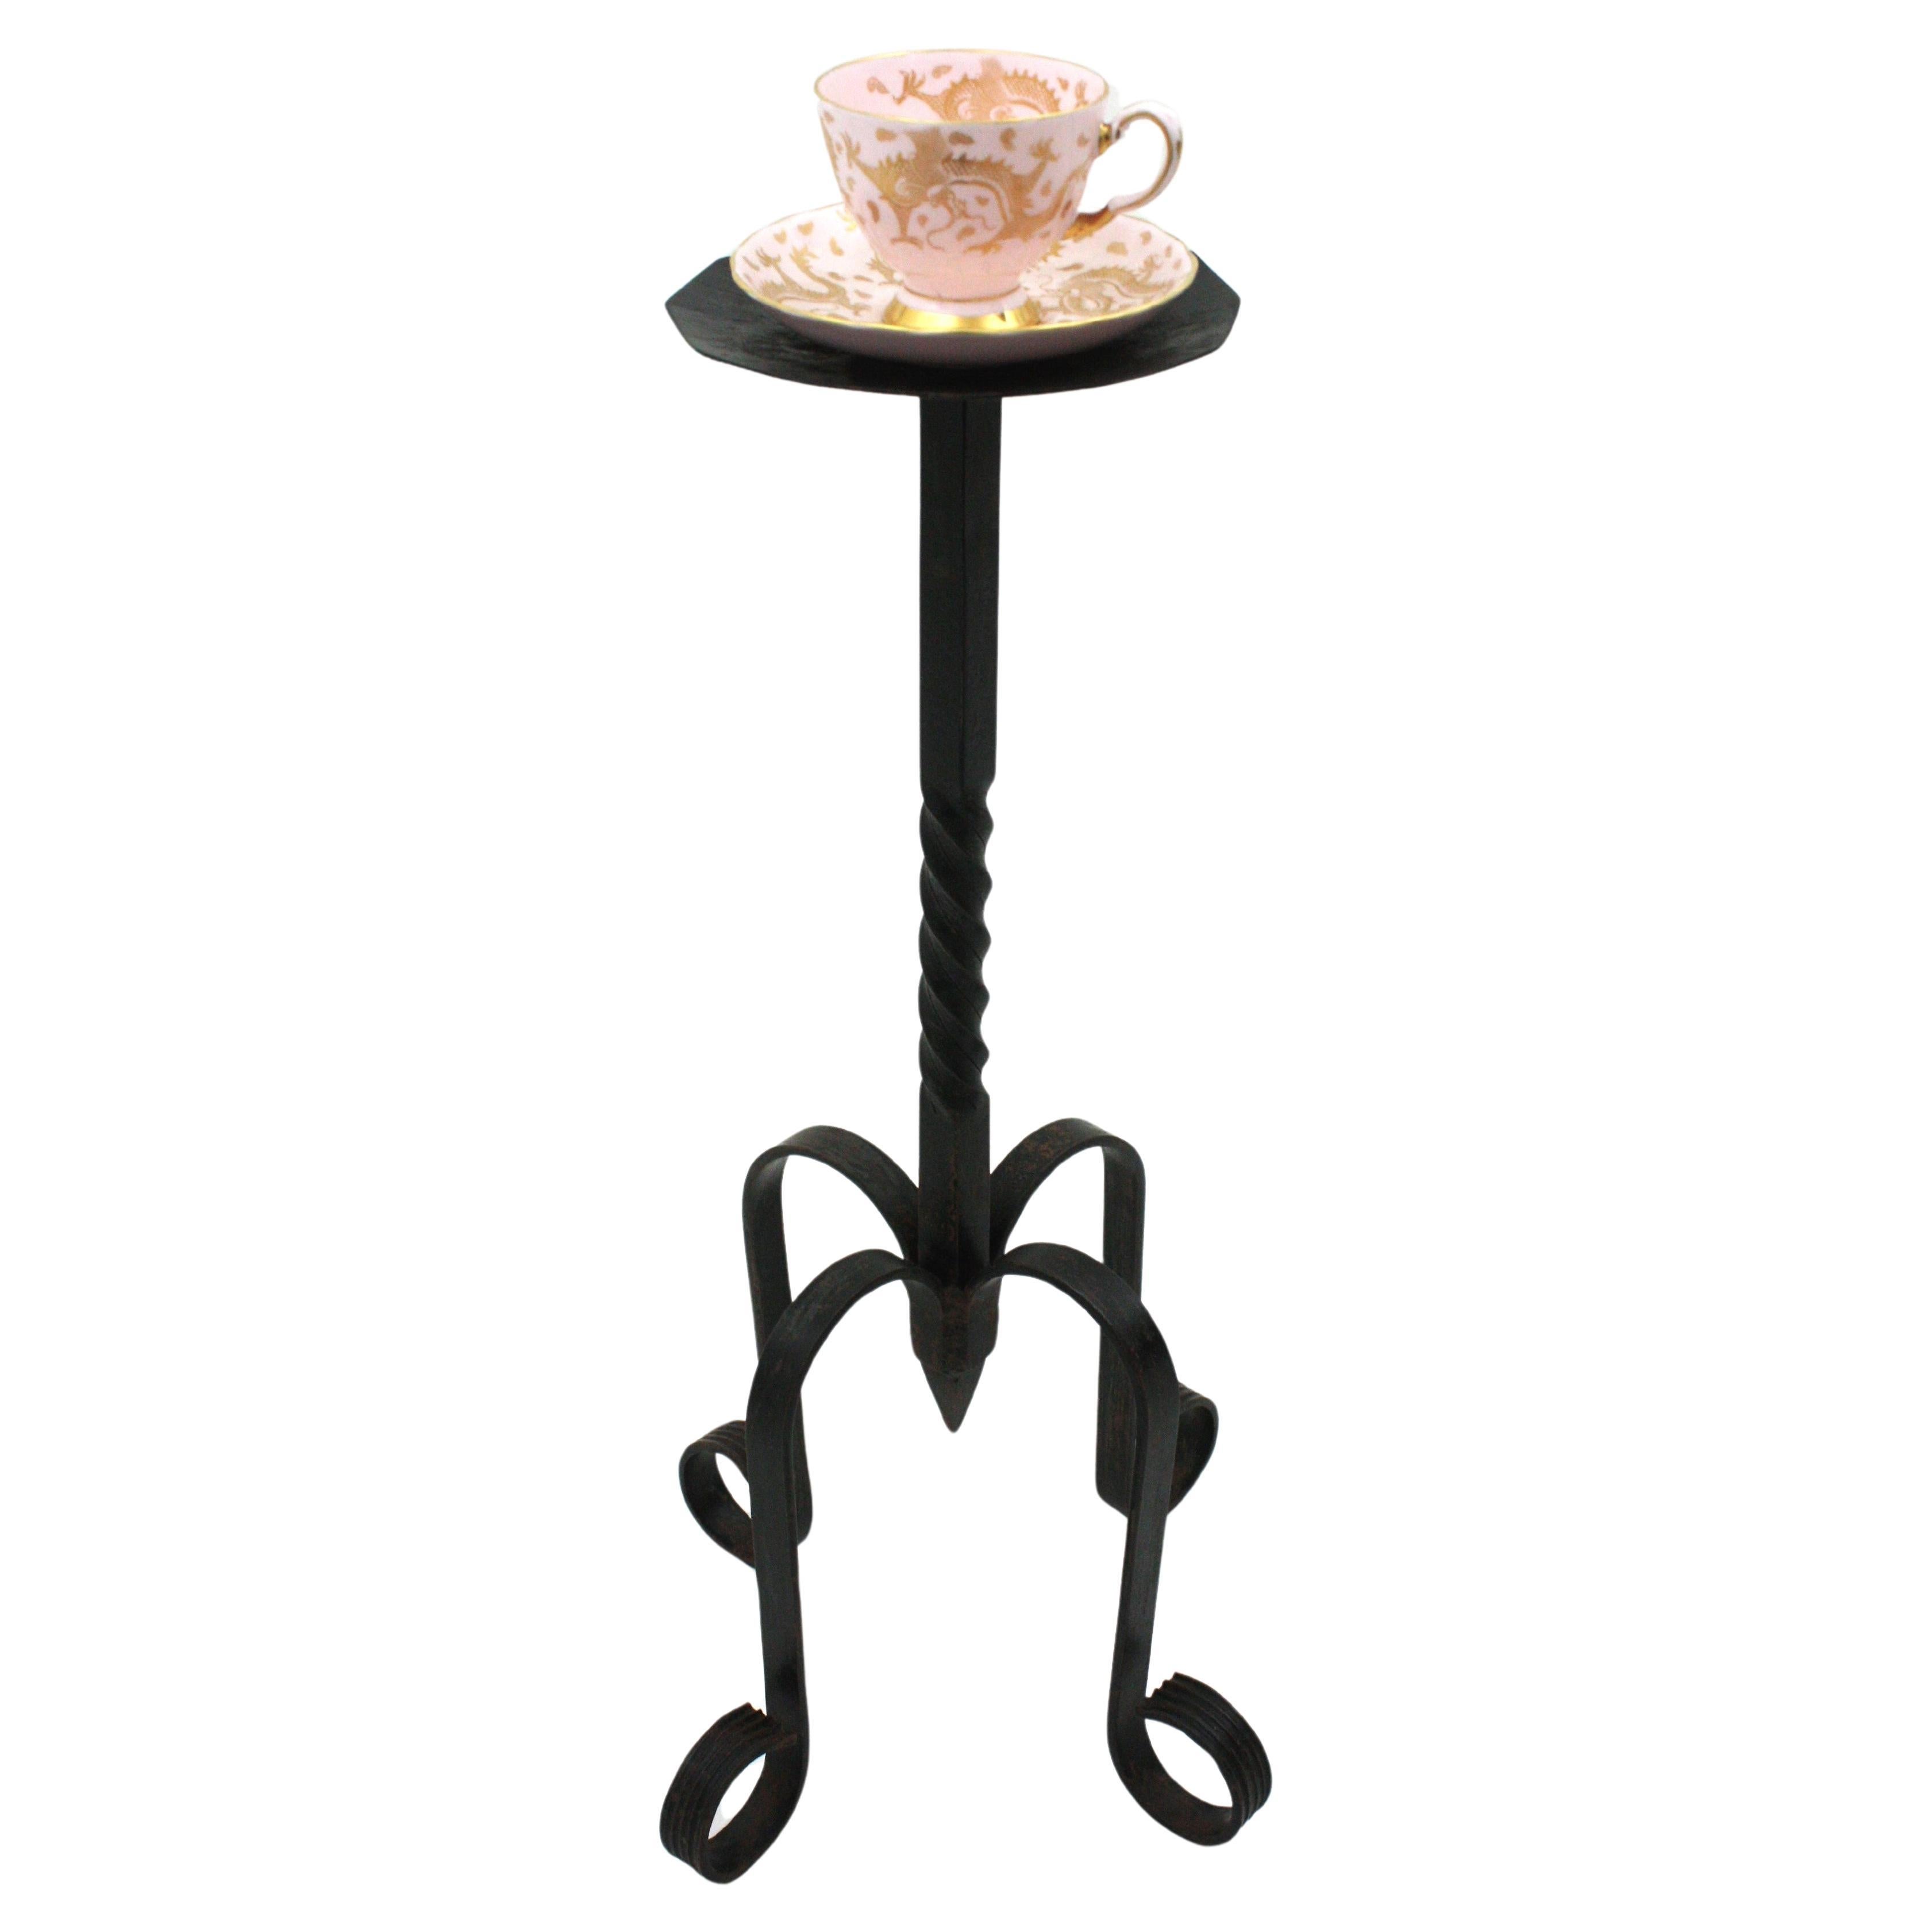 Elegant Gothic style hand-hammered iron round gueridon table standing on a tripod base. Spain, 1940s.
This wrought iron black painted table has twisted details at the steam and the top stands on a four footed base with scroll endings on each